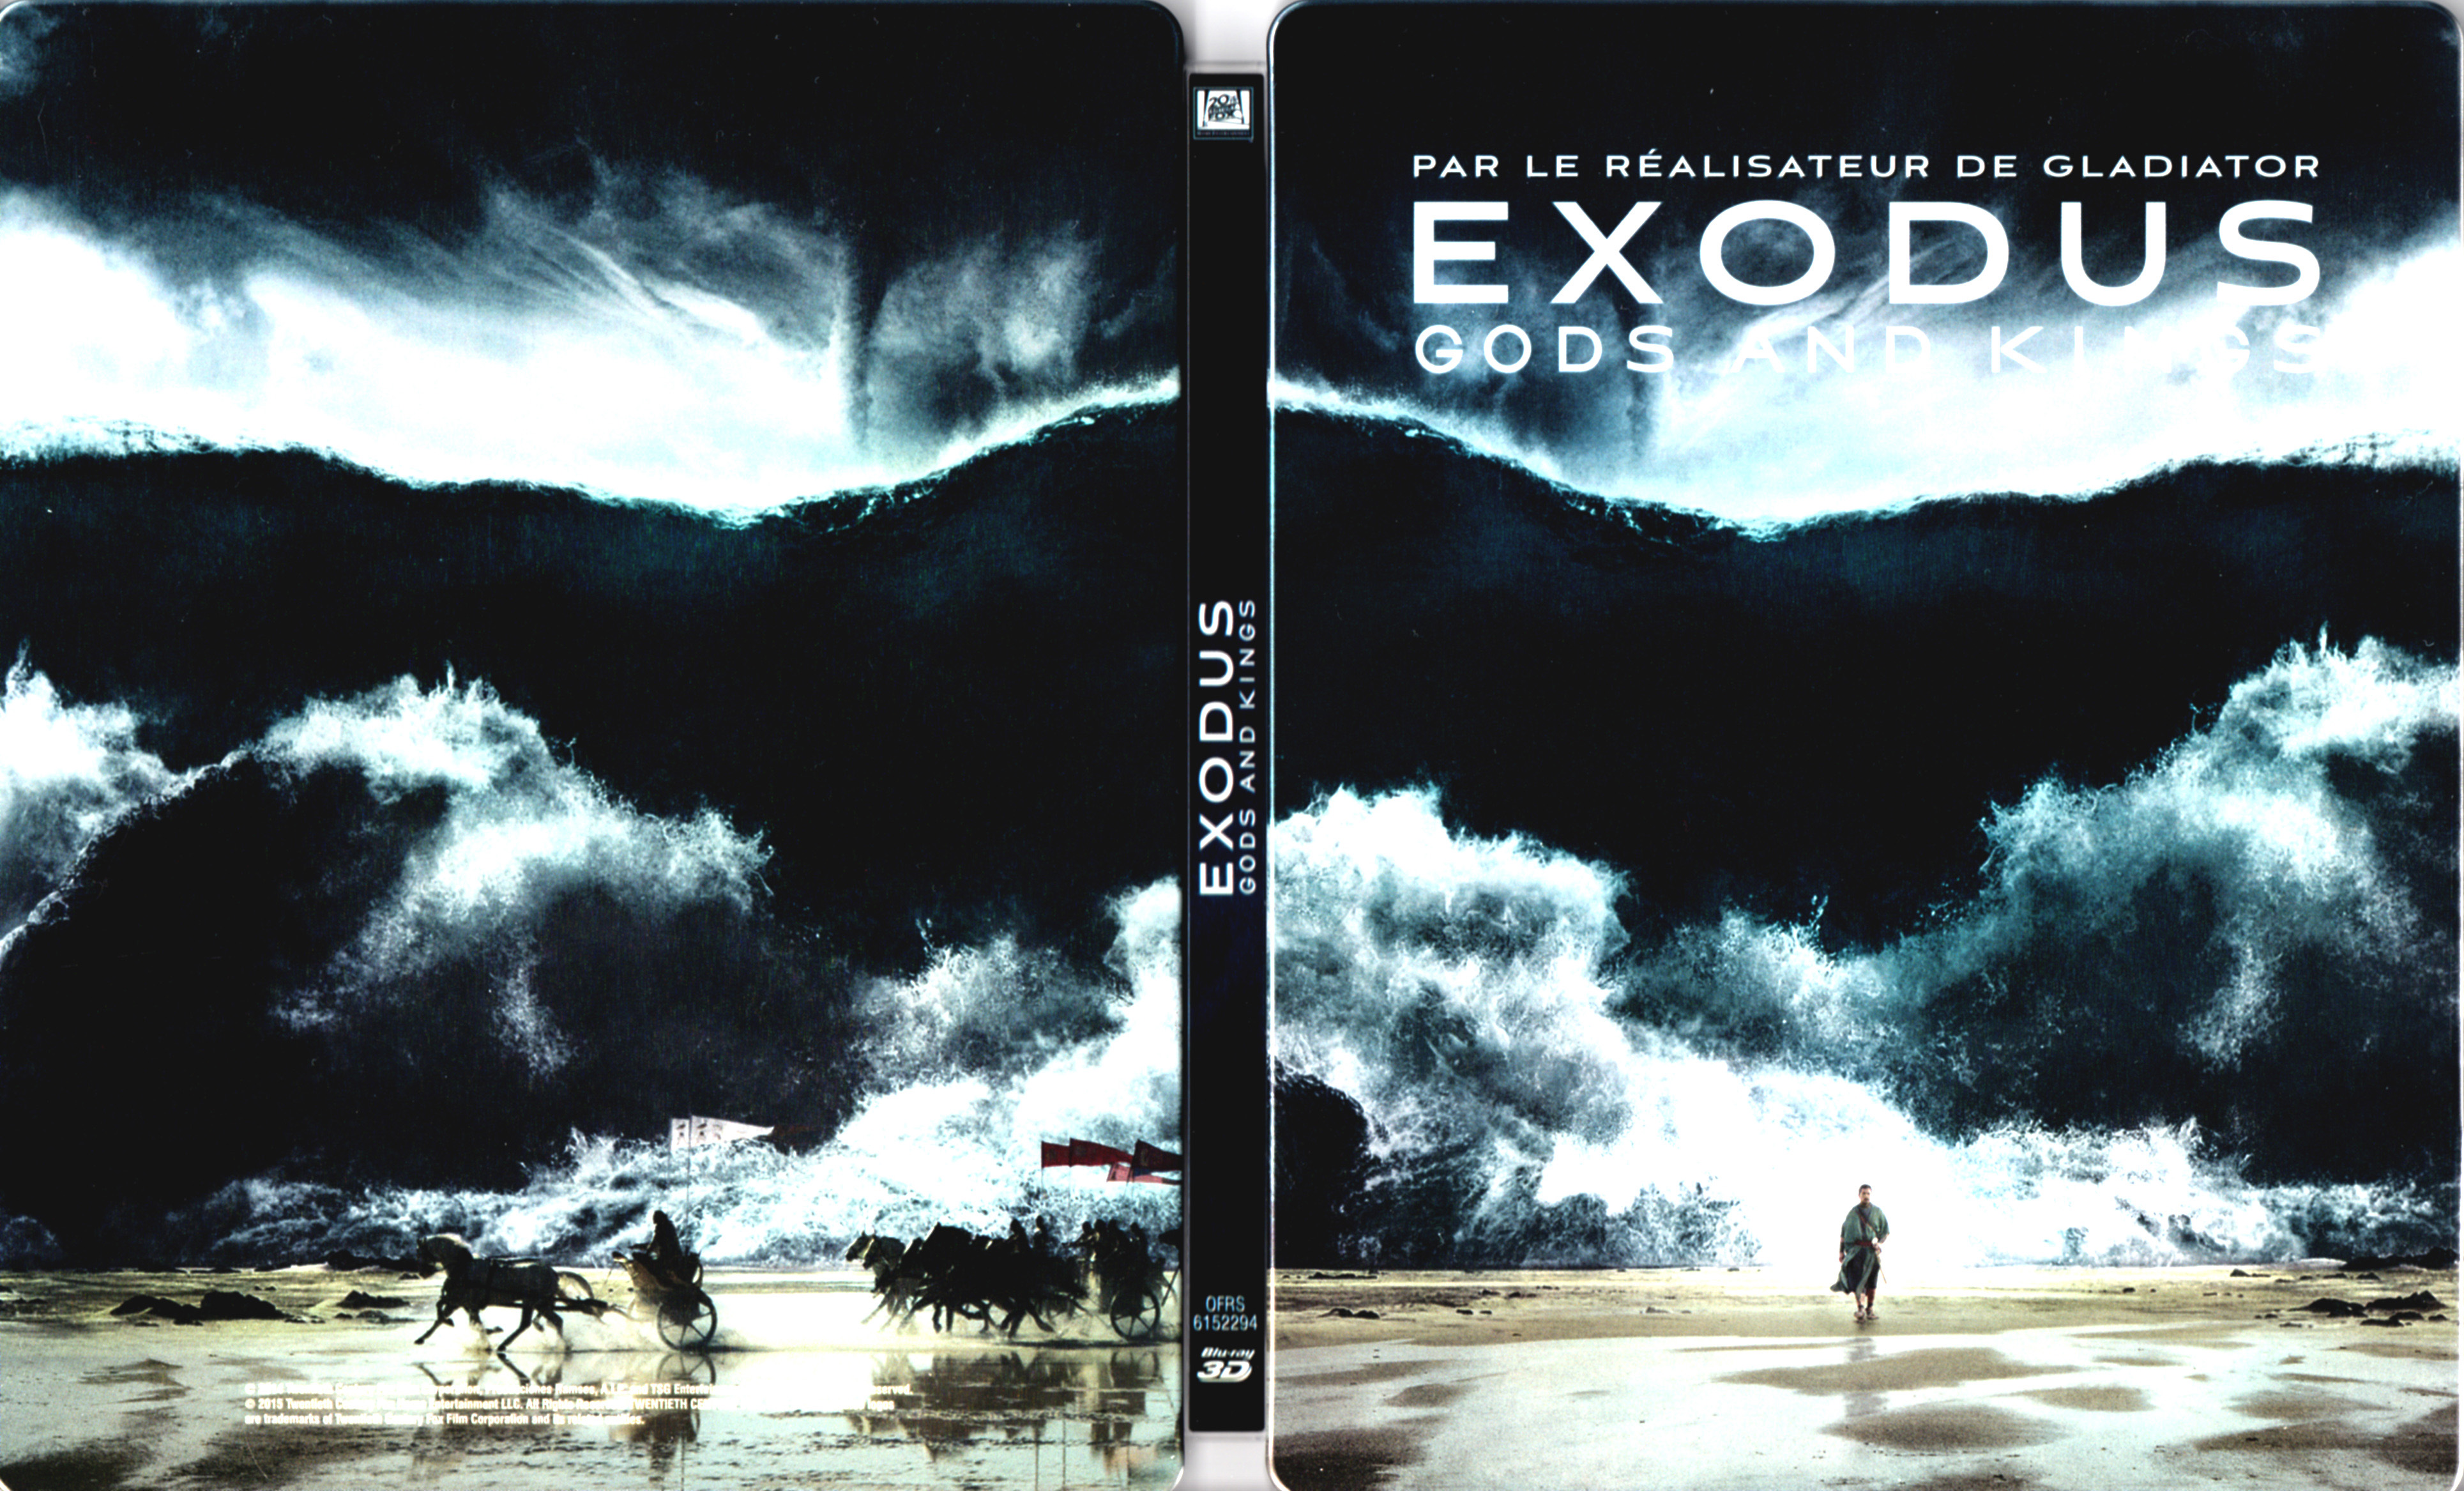 Jaquette DVD Exodus - Gods and kings 3D (BLU-RAY)